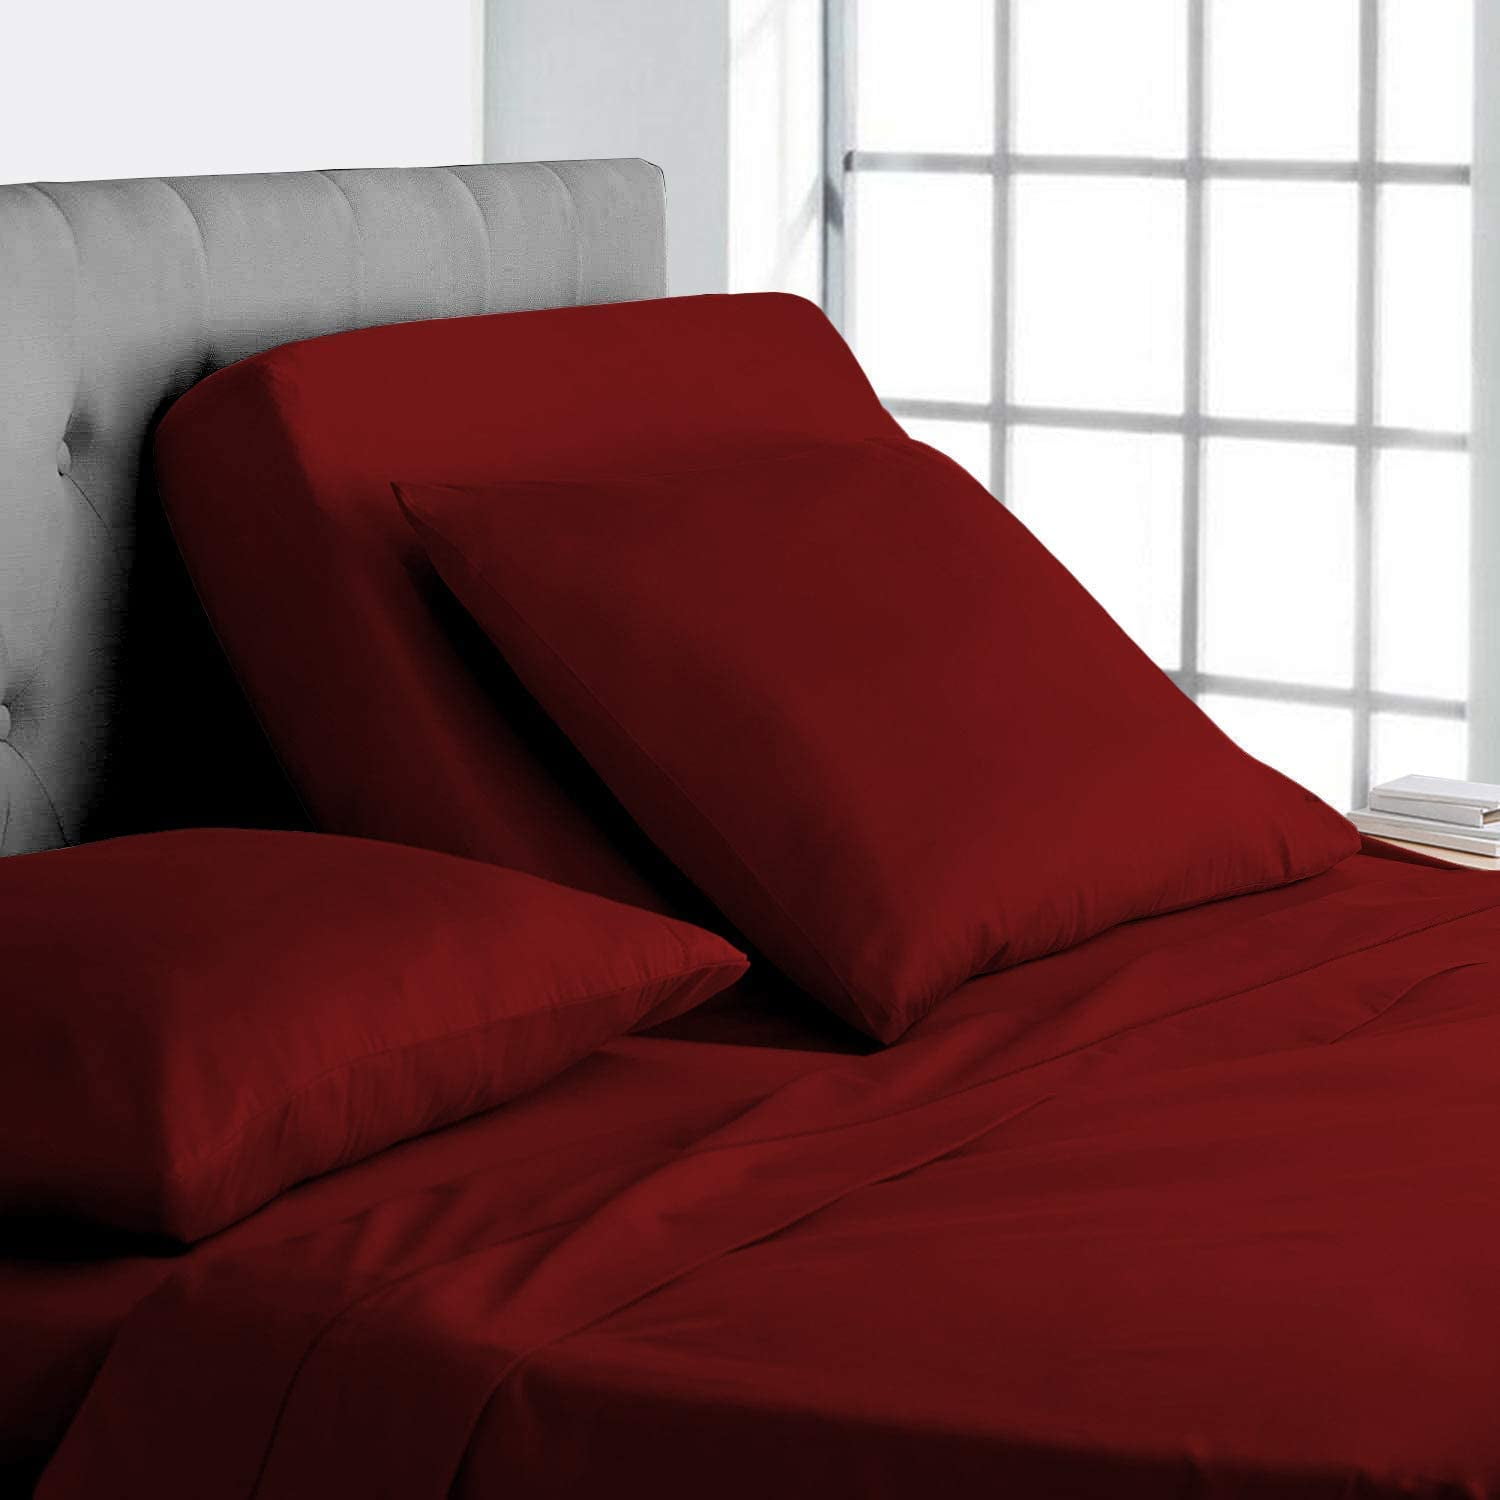 Top Split California King Sheets Sets for Adjustable Beds - 800 Thread  Count- 100% Egyptian Cotton 4Pcs Bed Sheets, 18'' Inch Deep Pockets,  Burgundy Solid - Split Down 34 inches from The top - Walmart.com